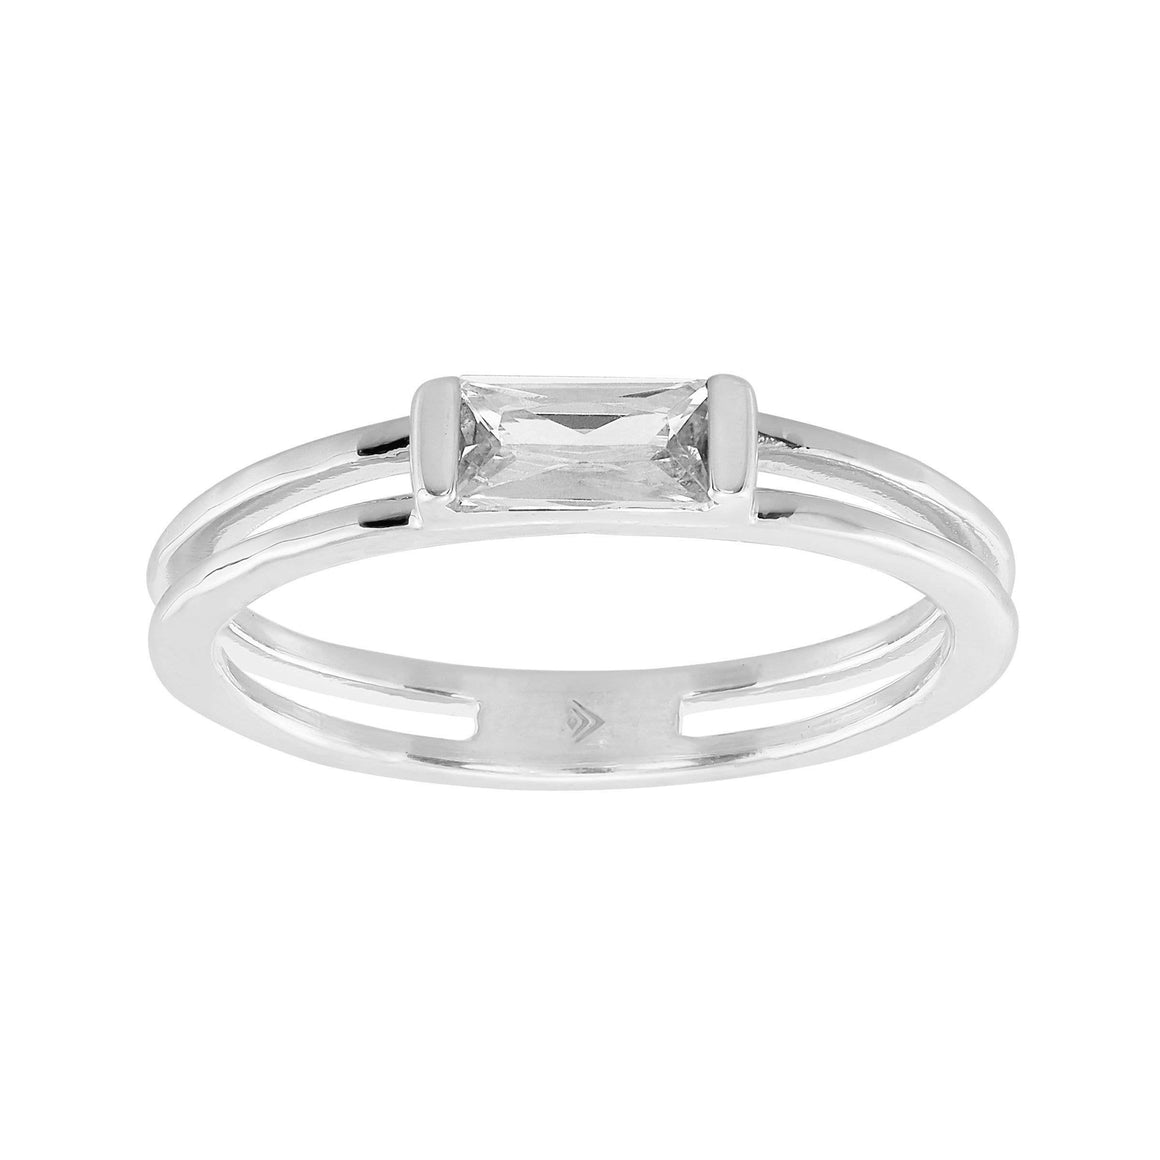 Silpada 'Baguette Stack' Cubic Zirconia Ring in Silver